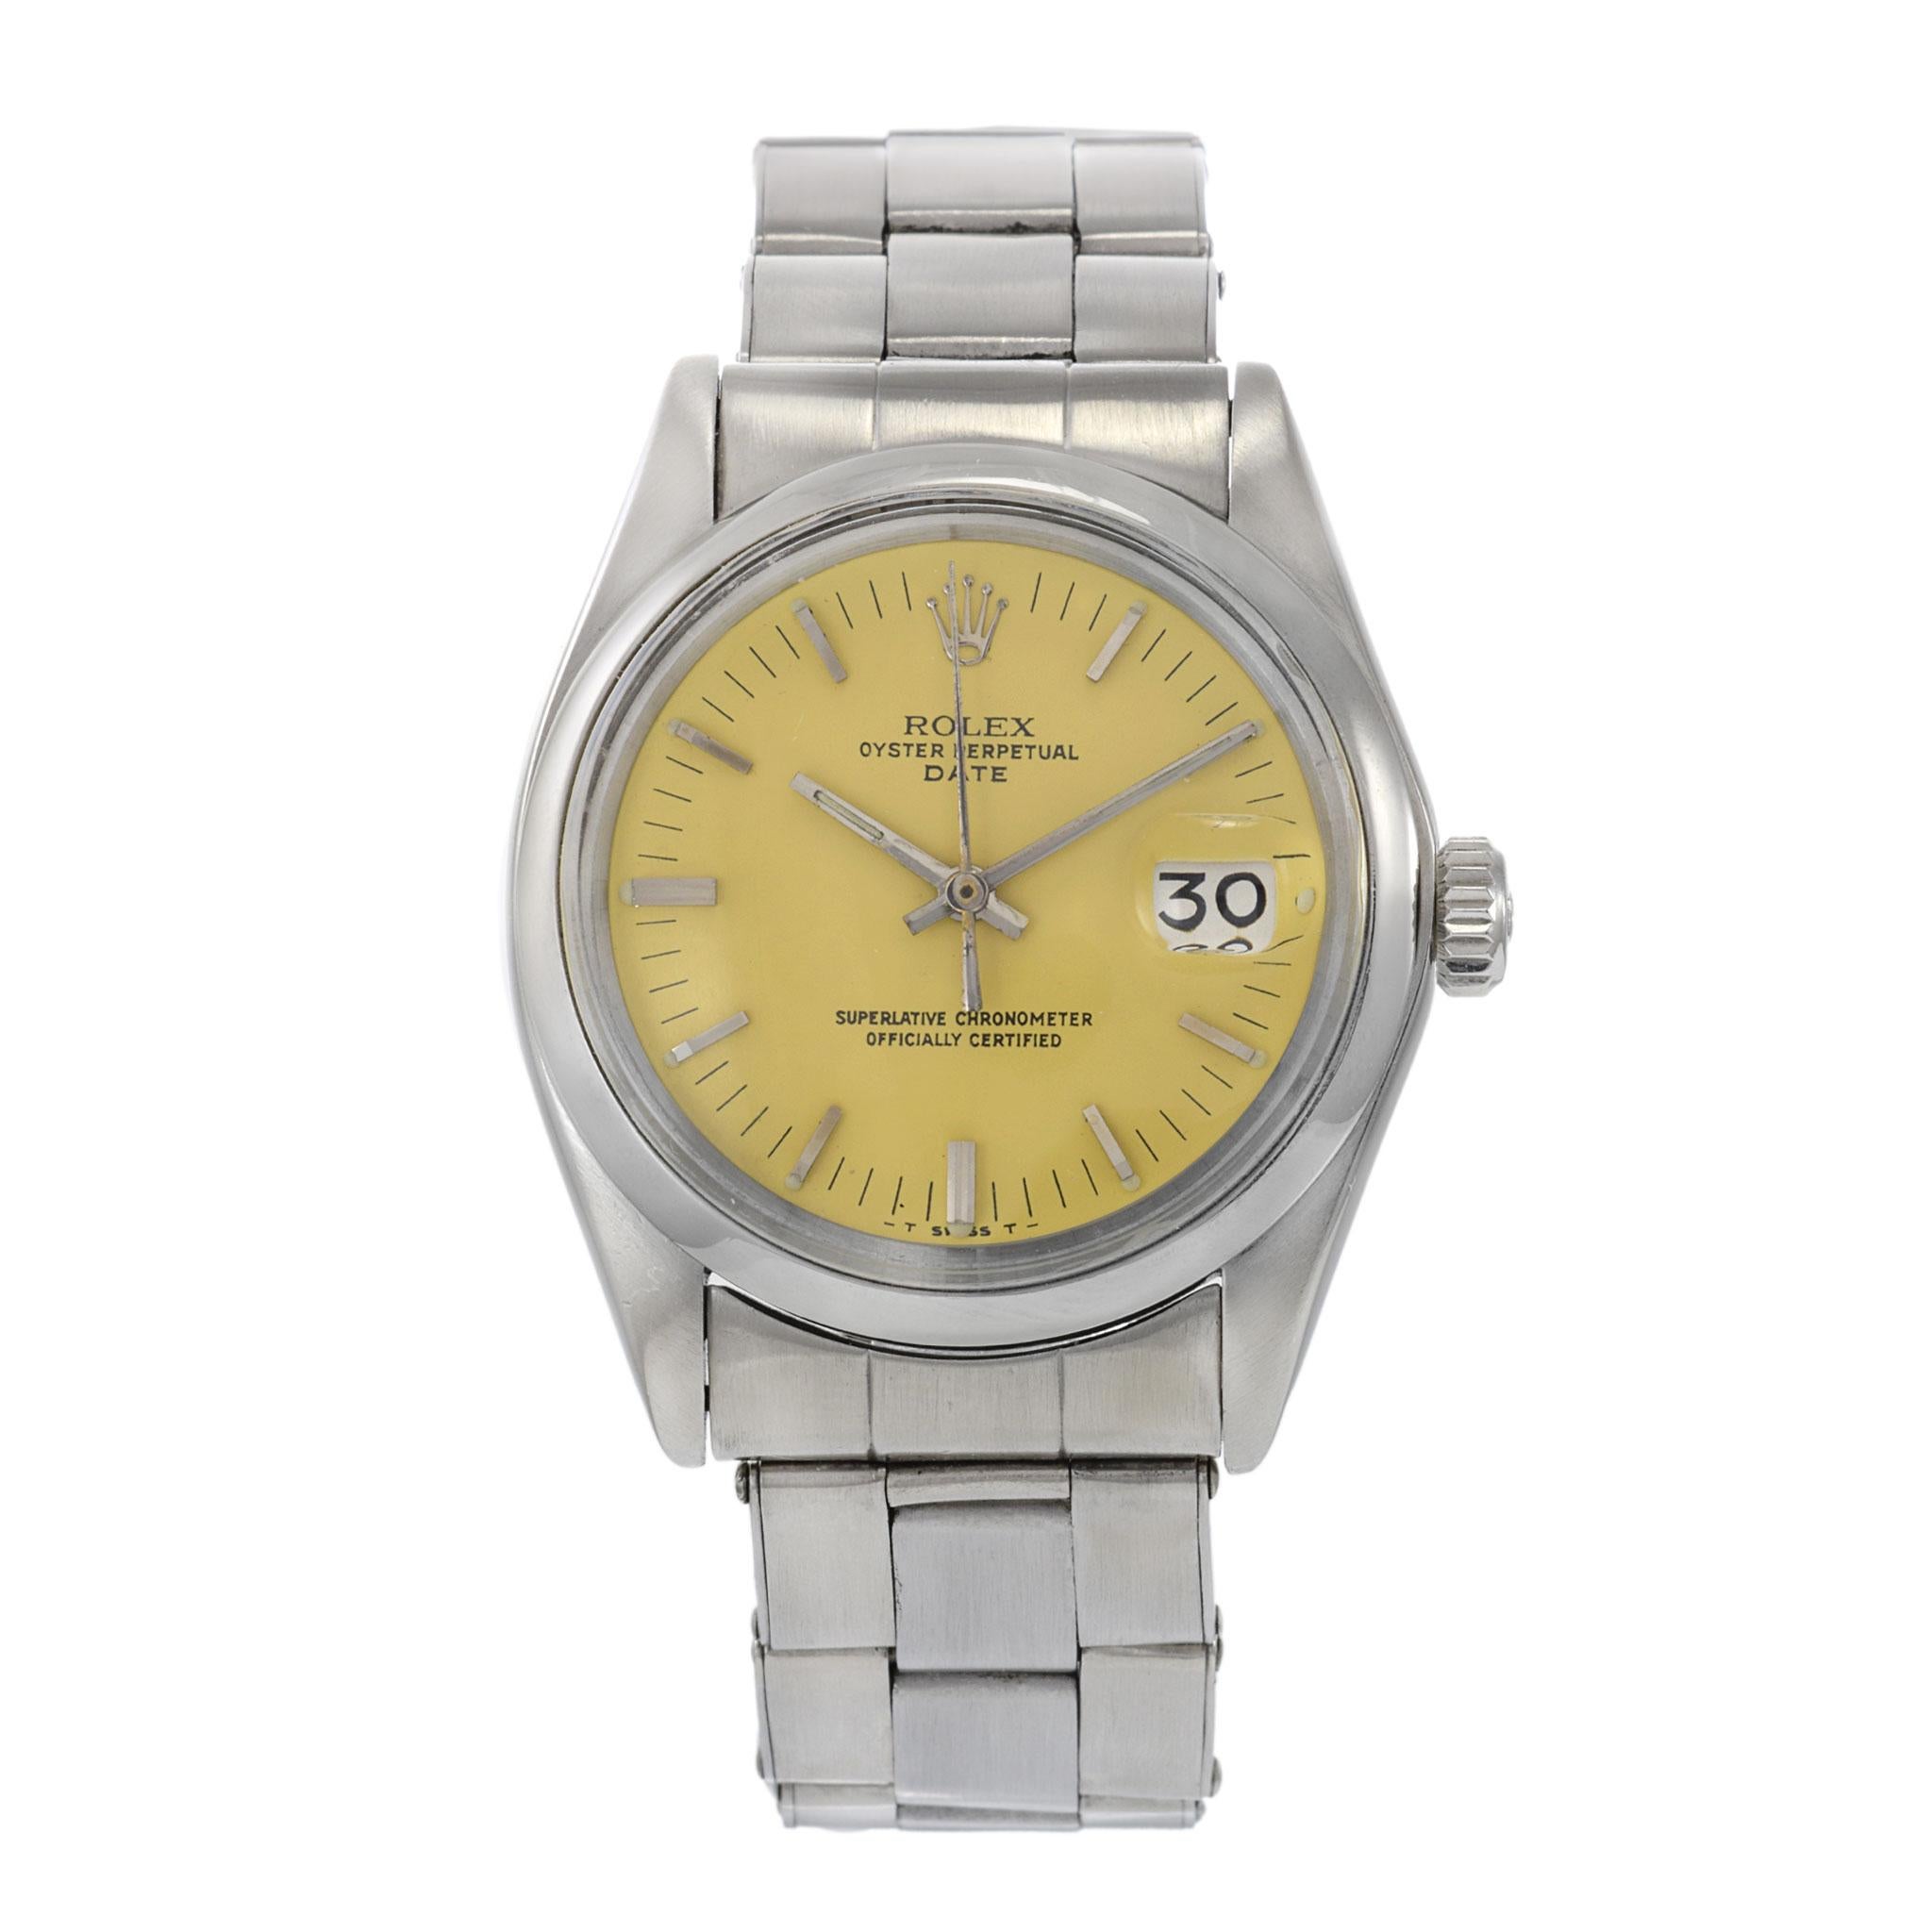 This vintage Rolex Date reference 1500 is from 1973 and remains a timeless classic suitable for both men and women. It features an automatic movement, ensuring reliable timekeeping. The 34mm stainless steel case with a smooth bezel and acrylic